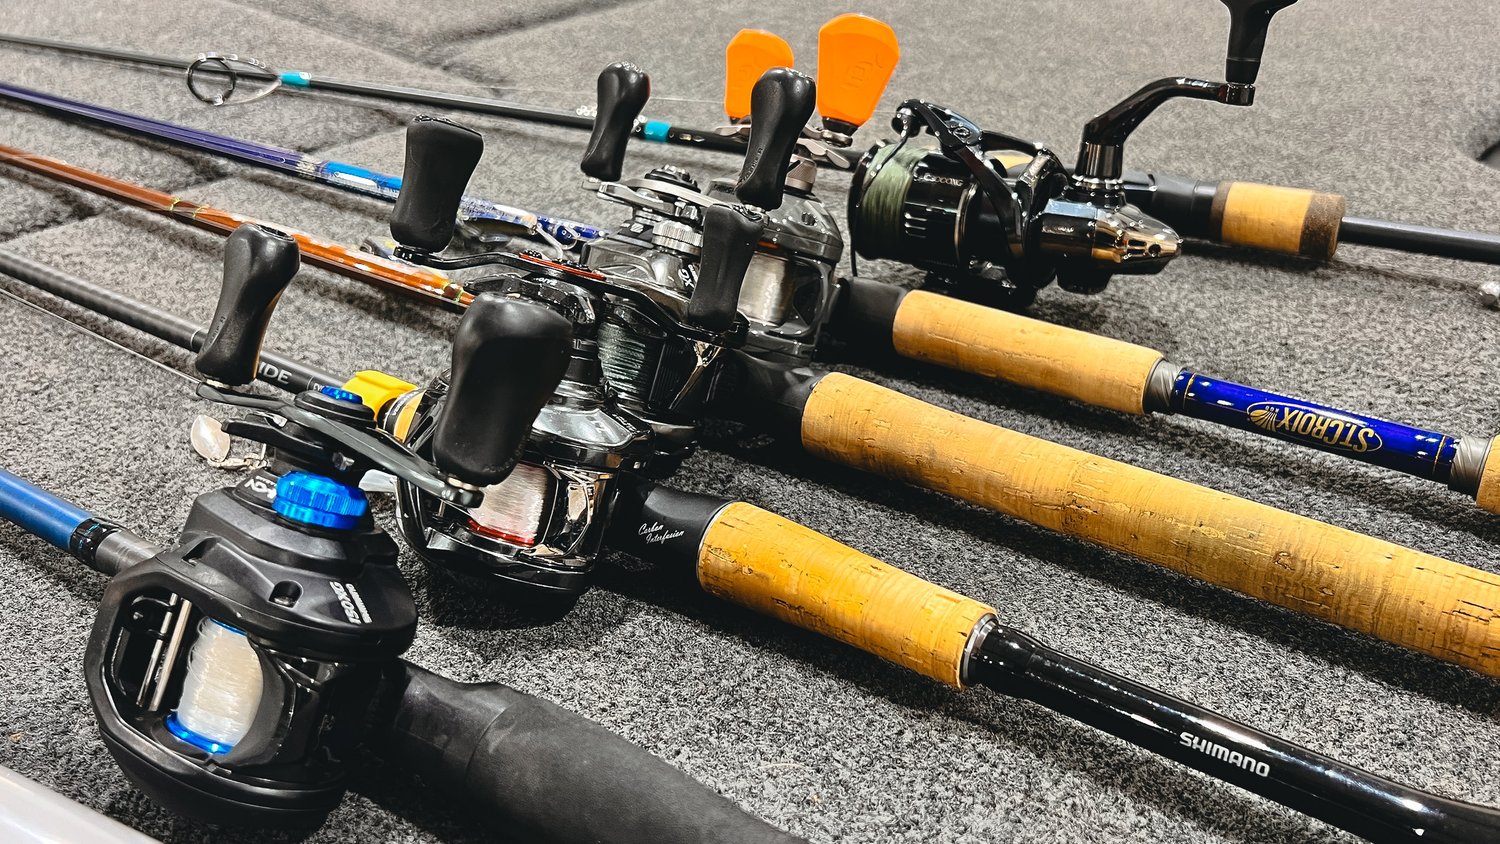 Top 5 Fishing Rods Every Angler Needs! (Beginner To Advanced) 